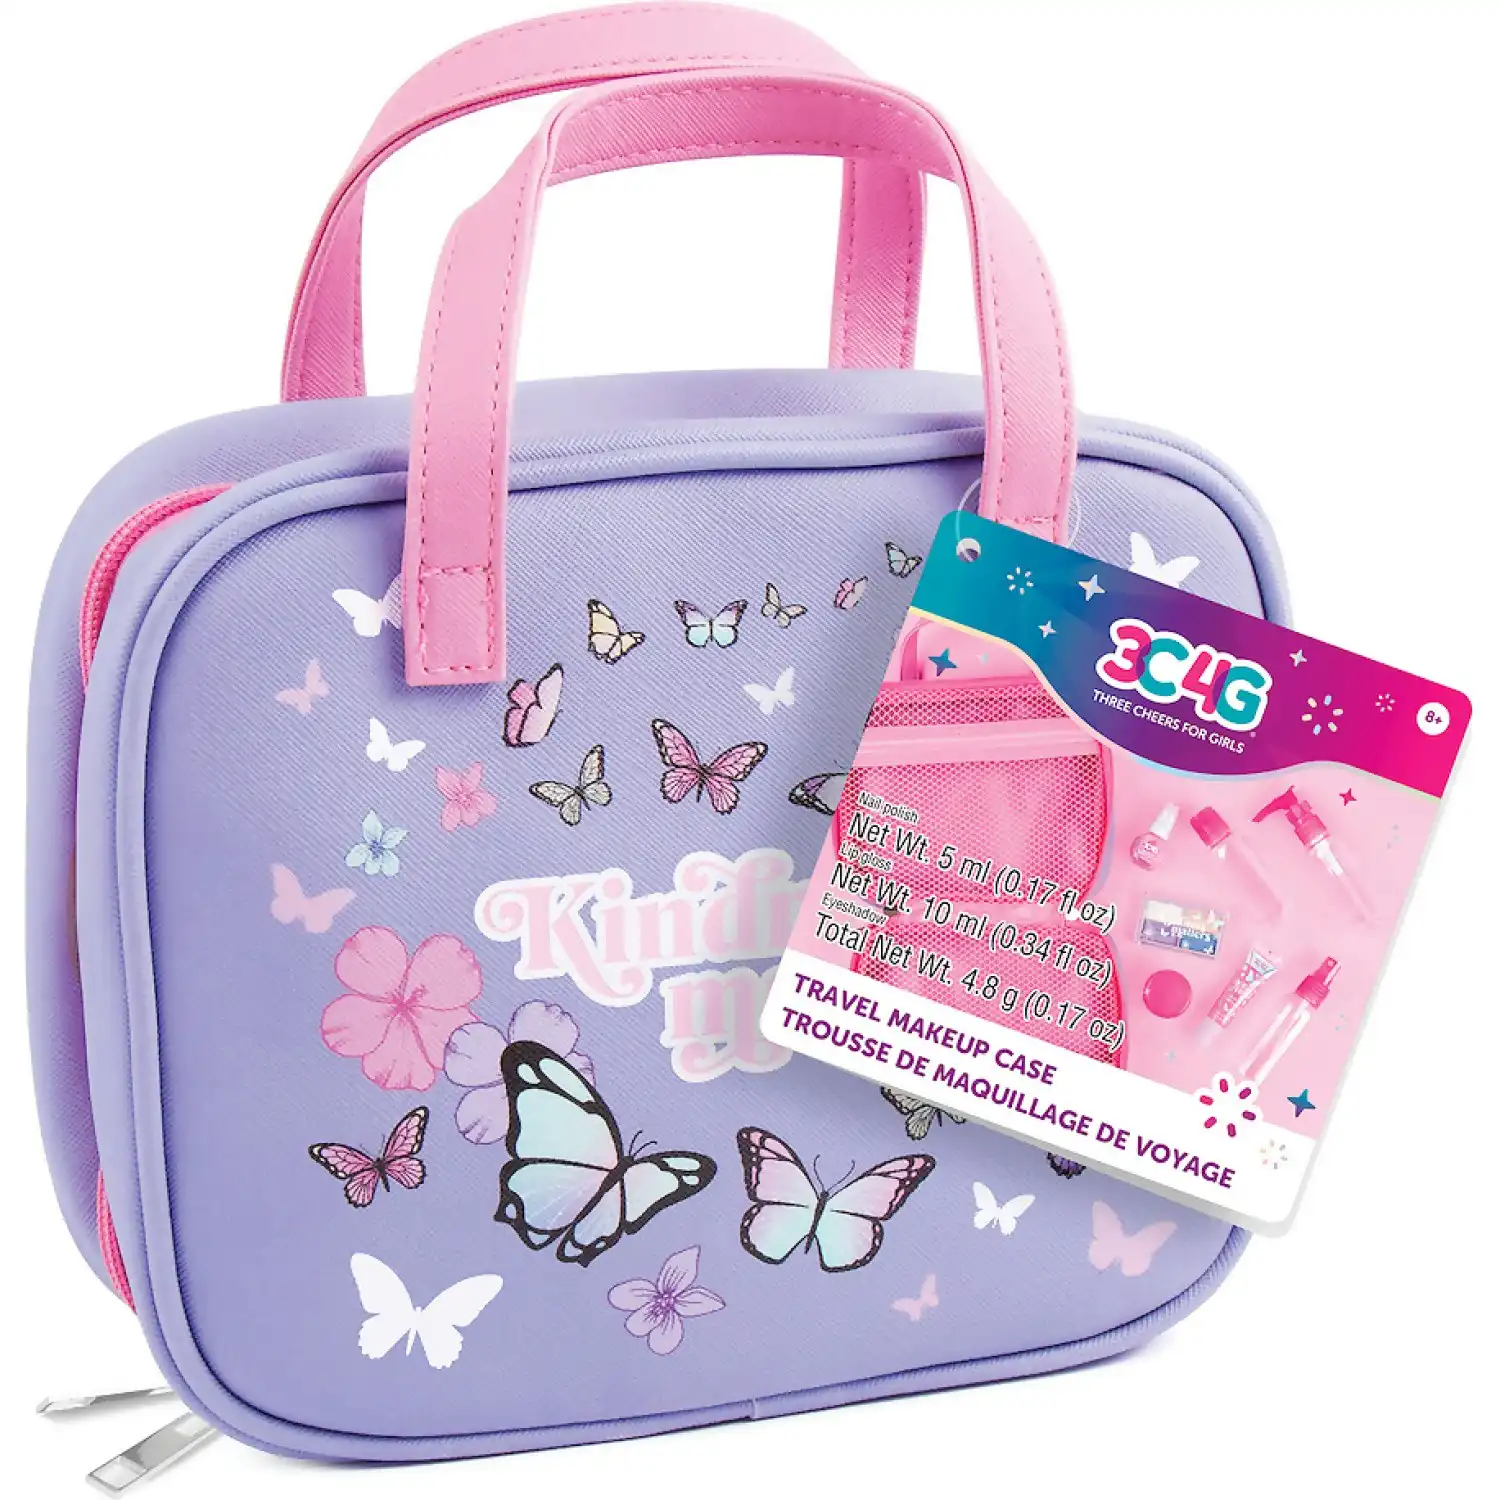 3C4G - Three Cheers For Girls - Butterfly Away Travel & Cosmetic Set